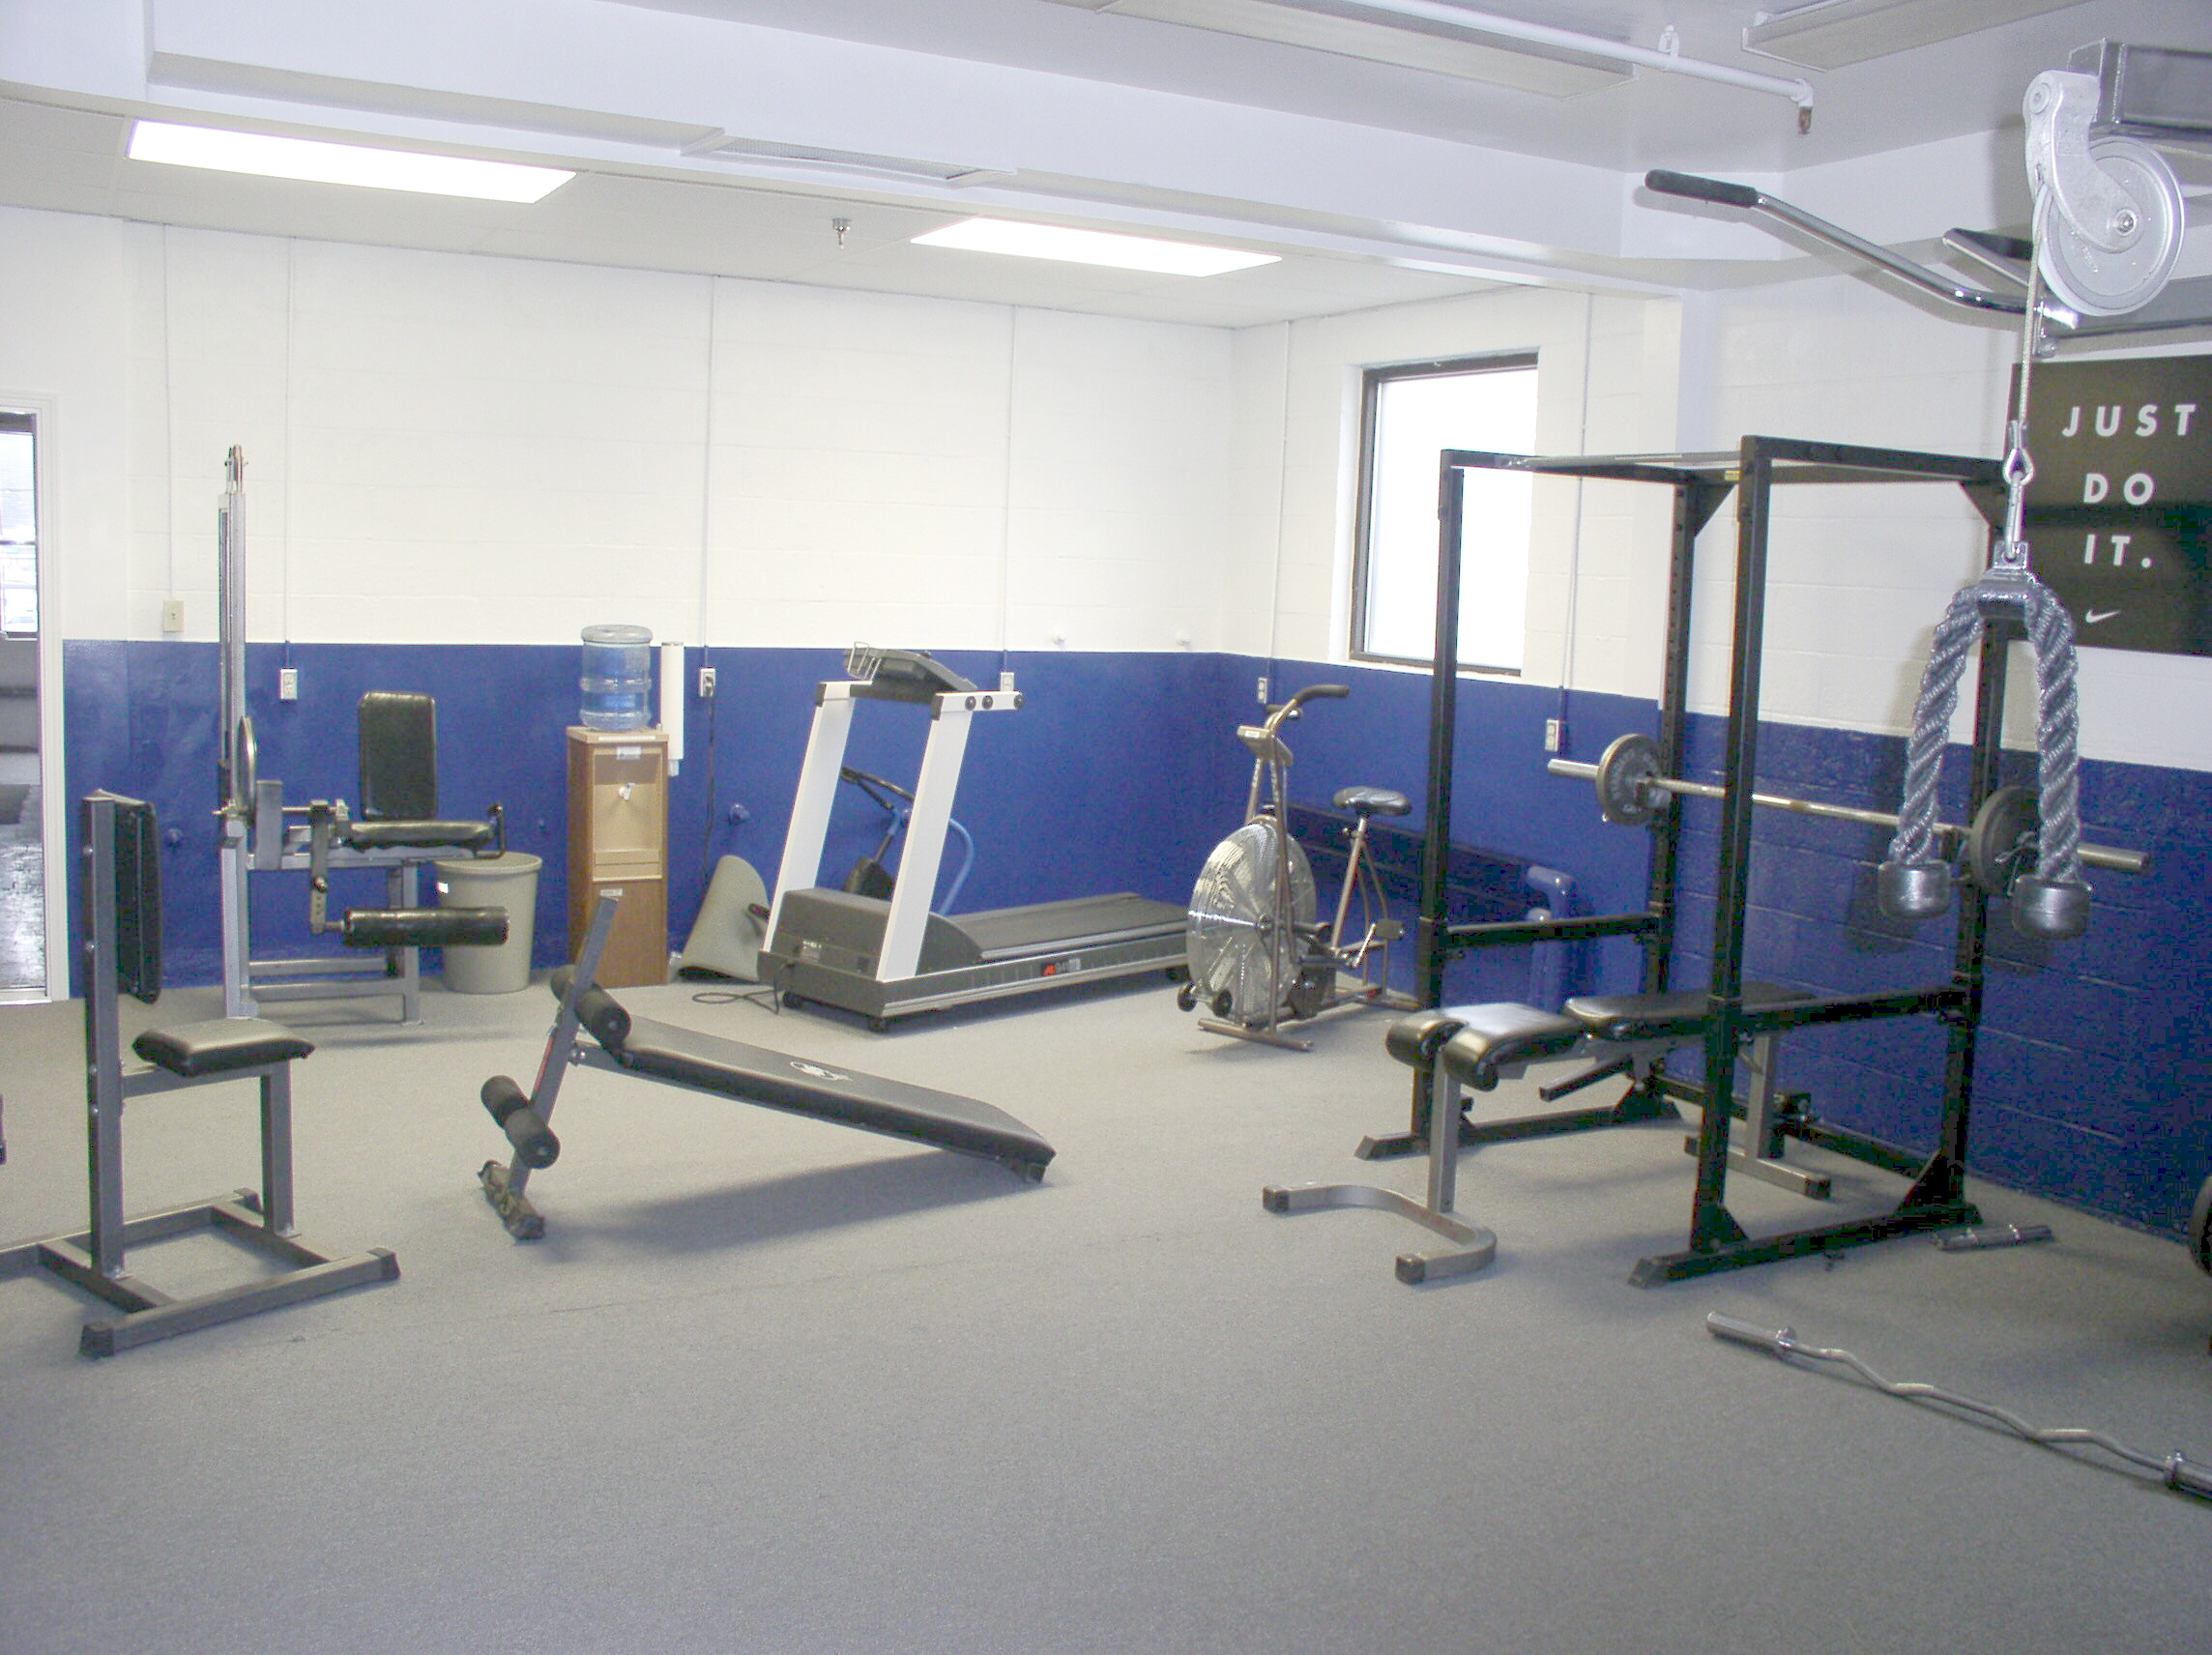 02-12-04  Other -Workout Room